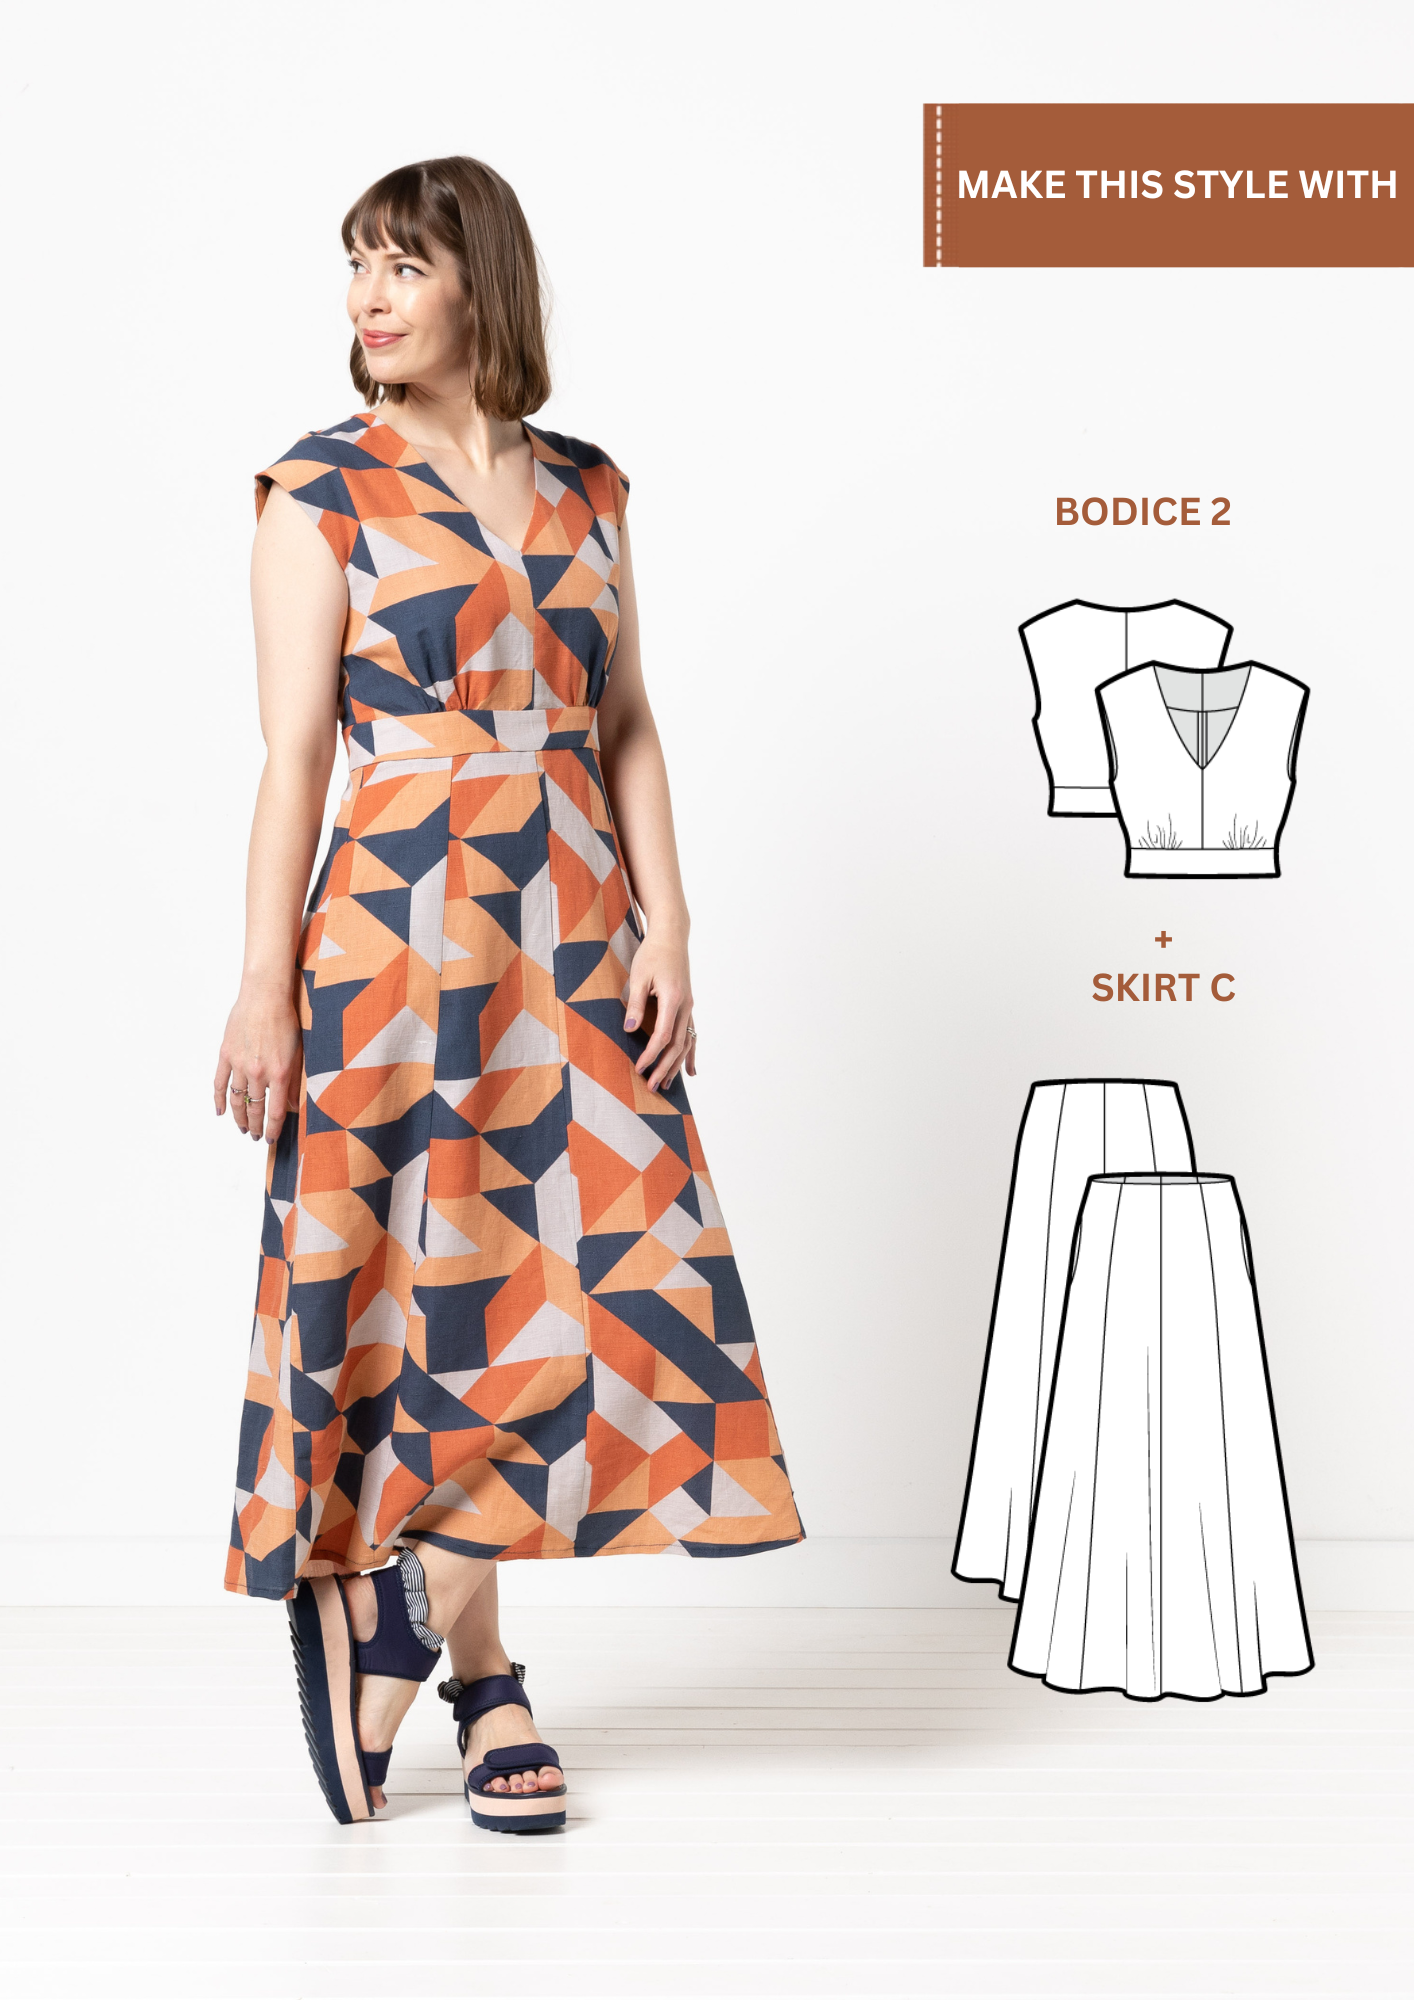 Sew this dress with Bodice 2 + Skirt C